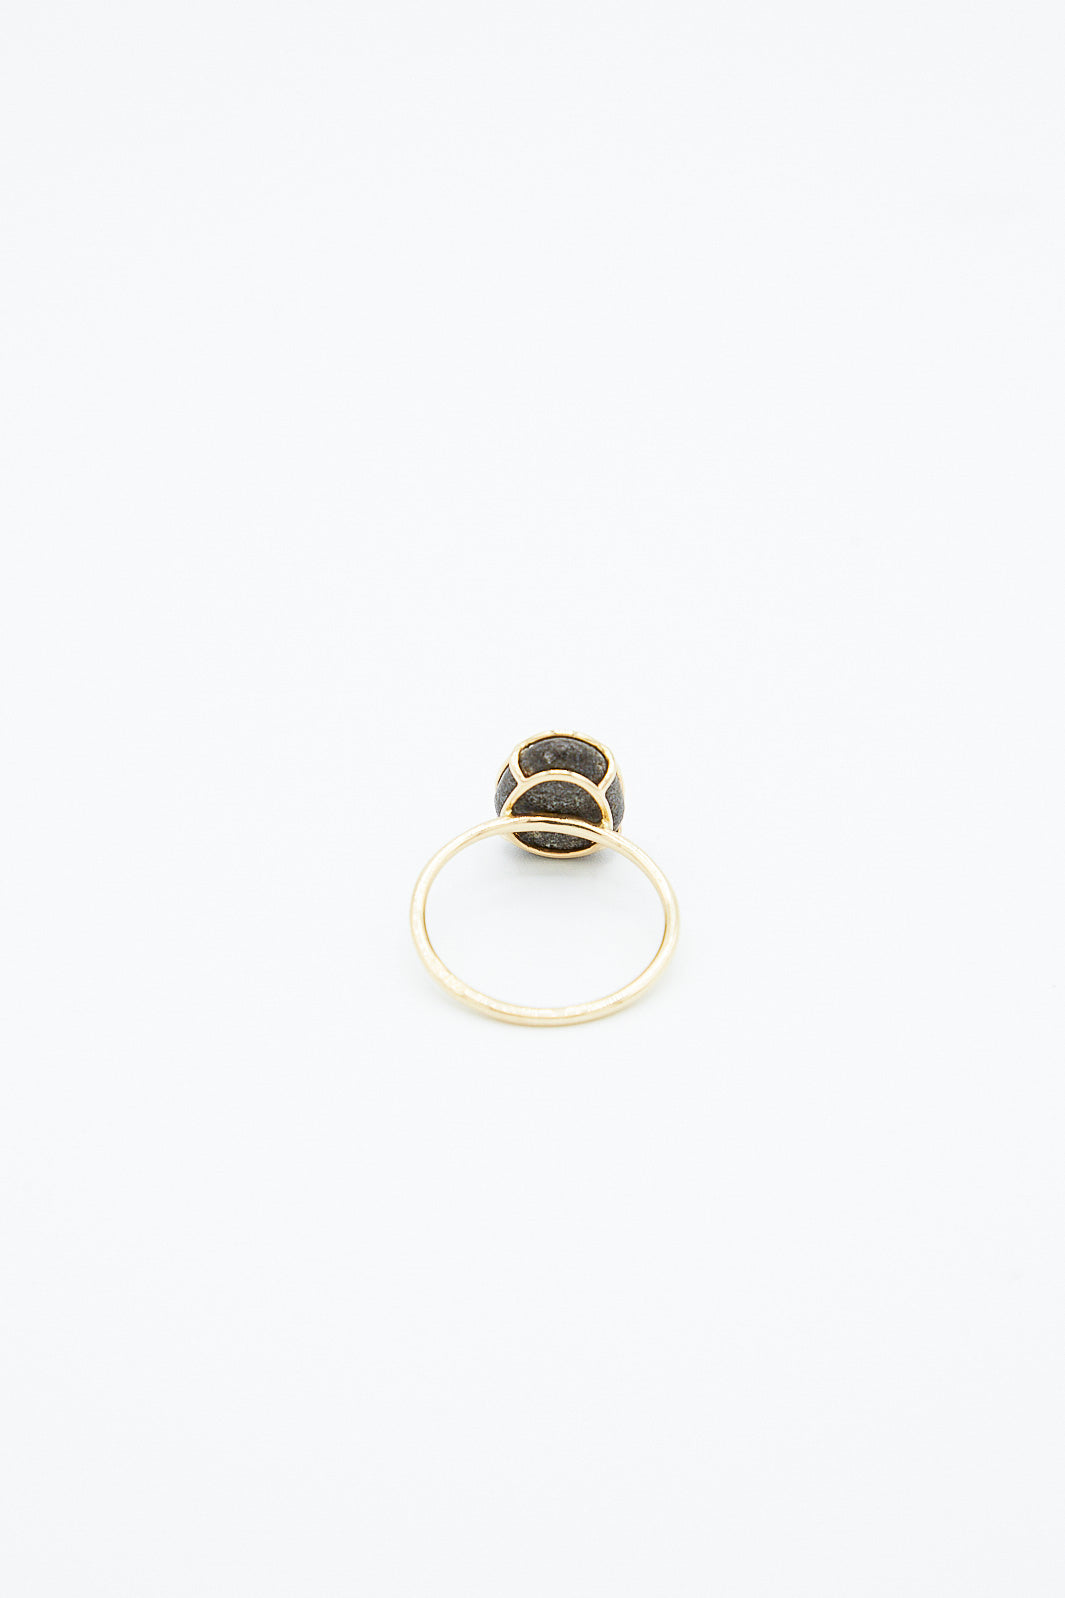 Handmade Mary MacGill 14K Floating Ring in Island Stone with a black stone in the middle, featuring a Block Island stone. Back view.